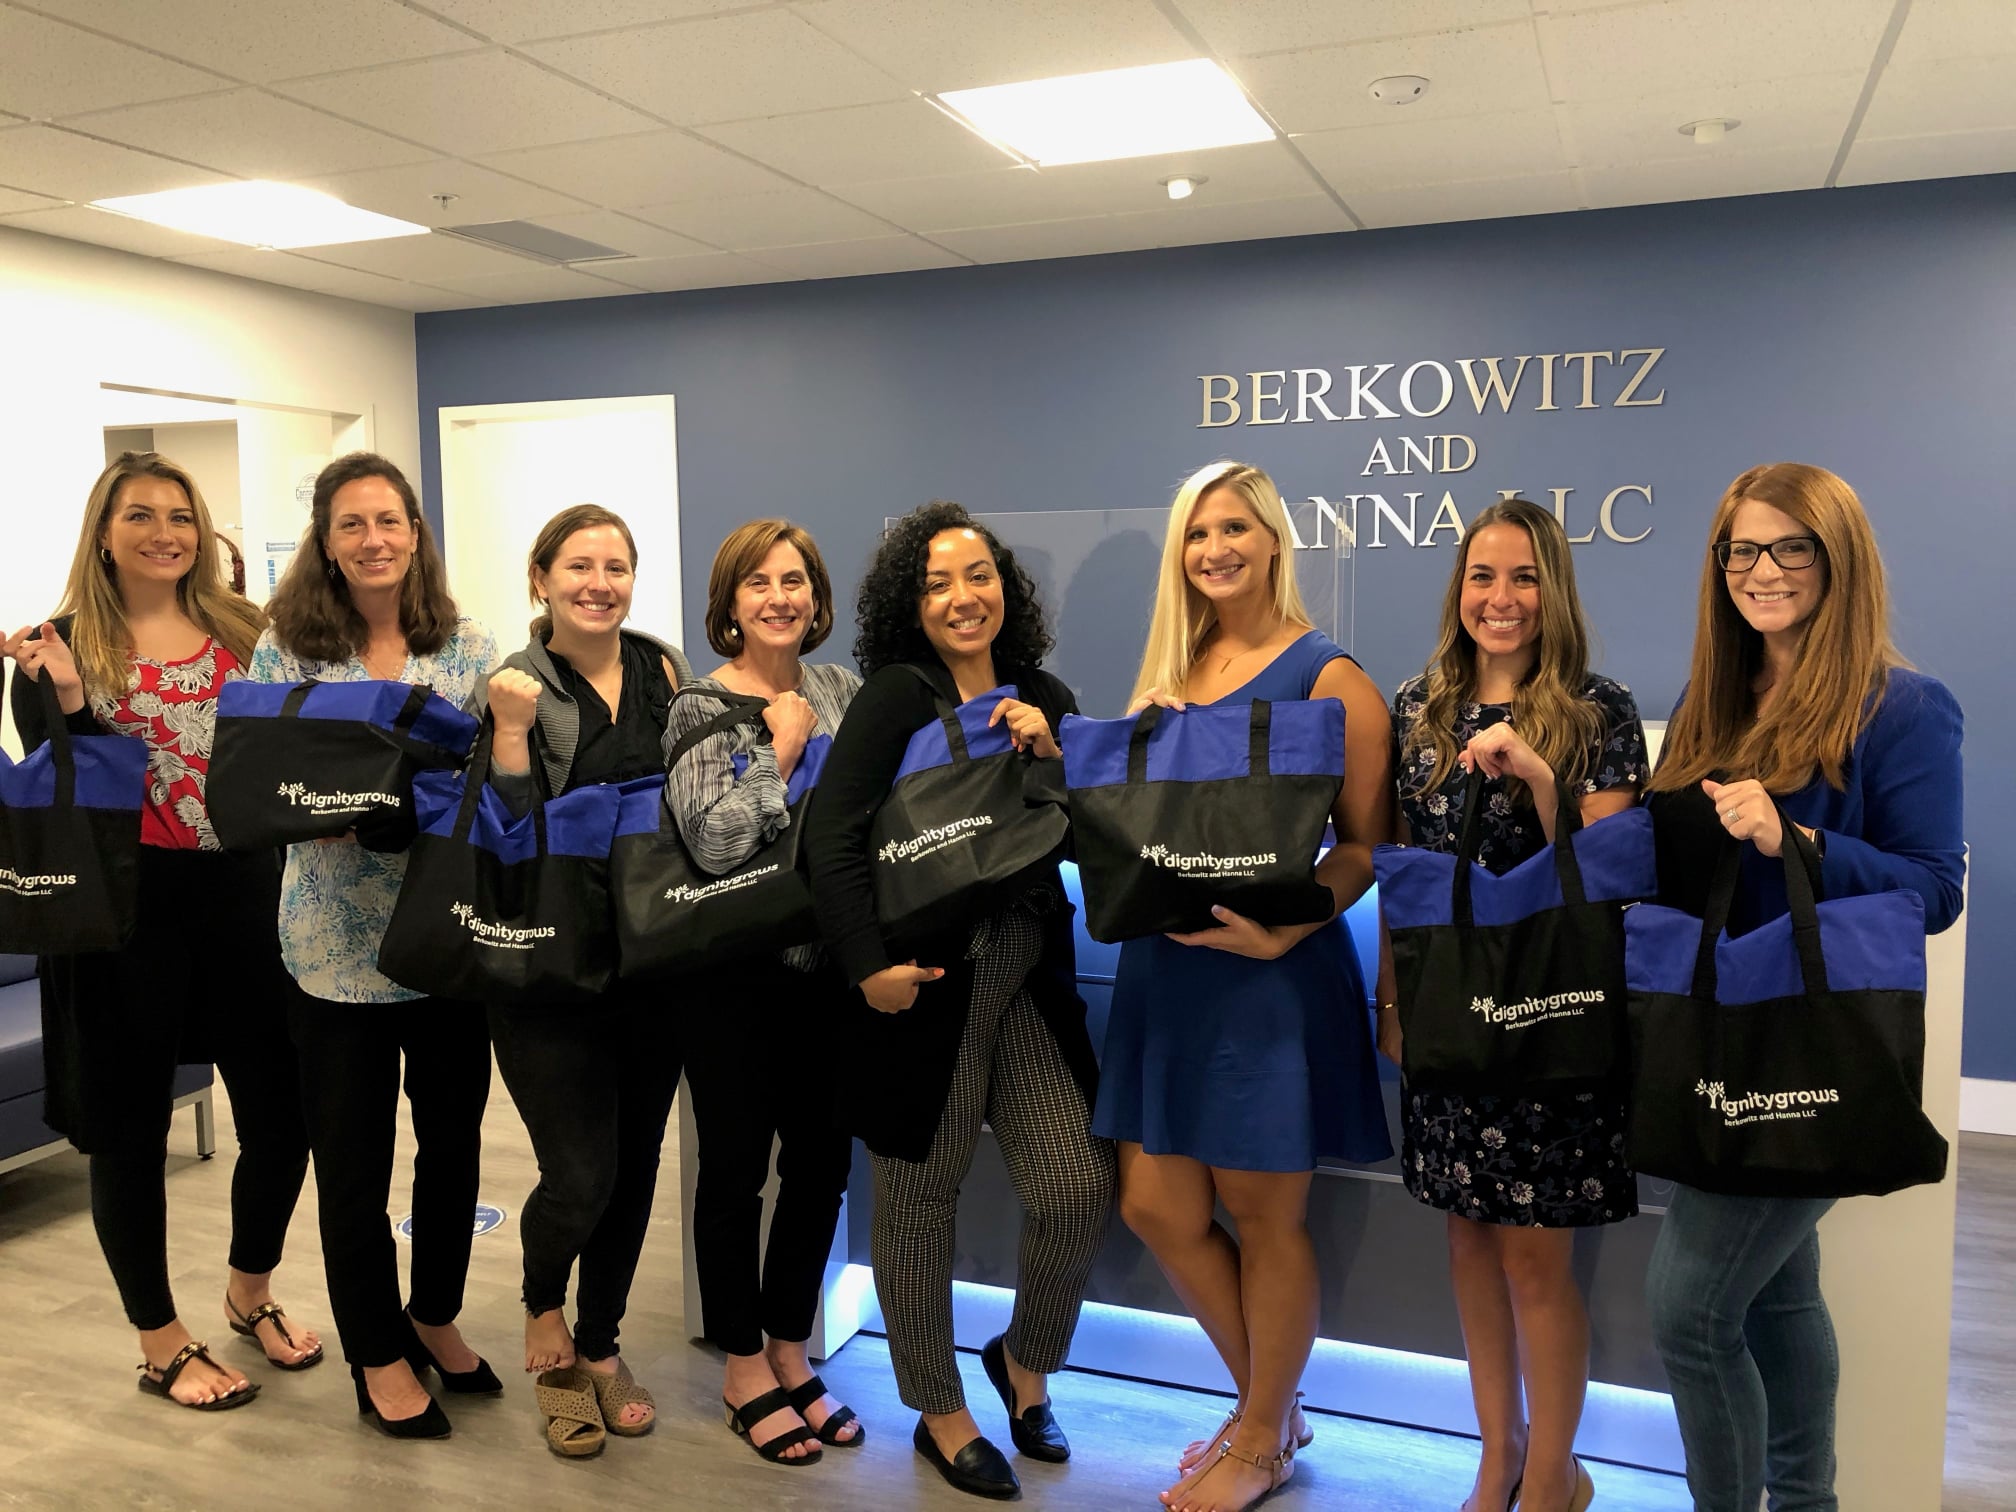 berkowitz and hanna selects building one community